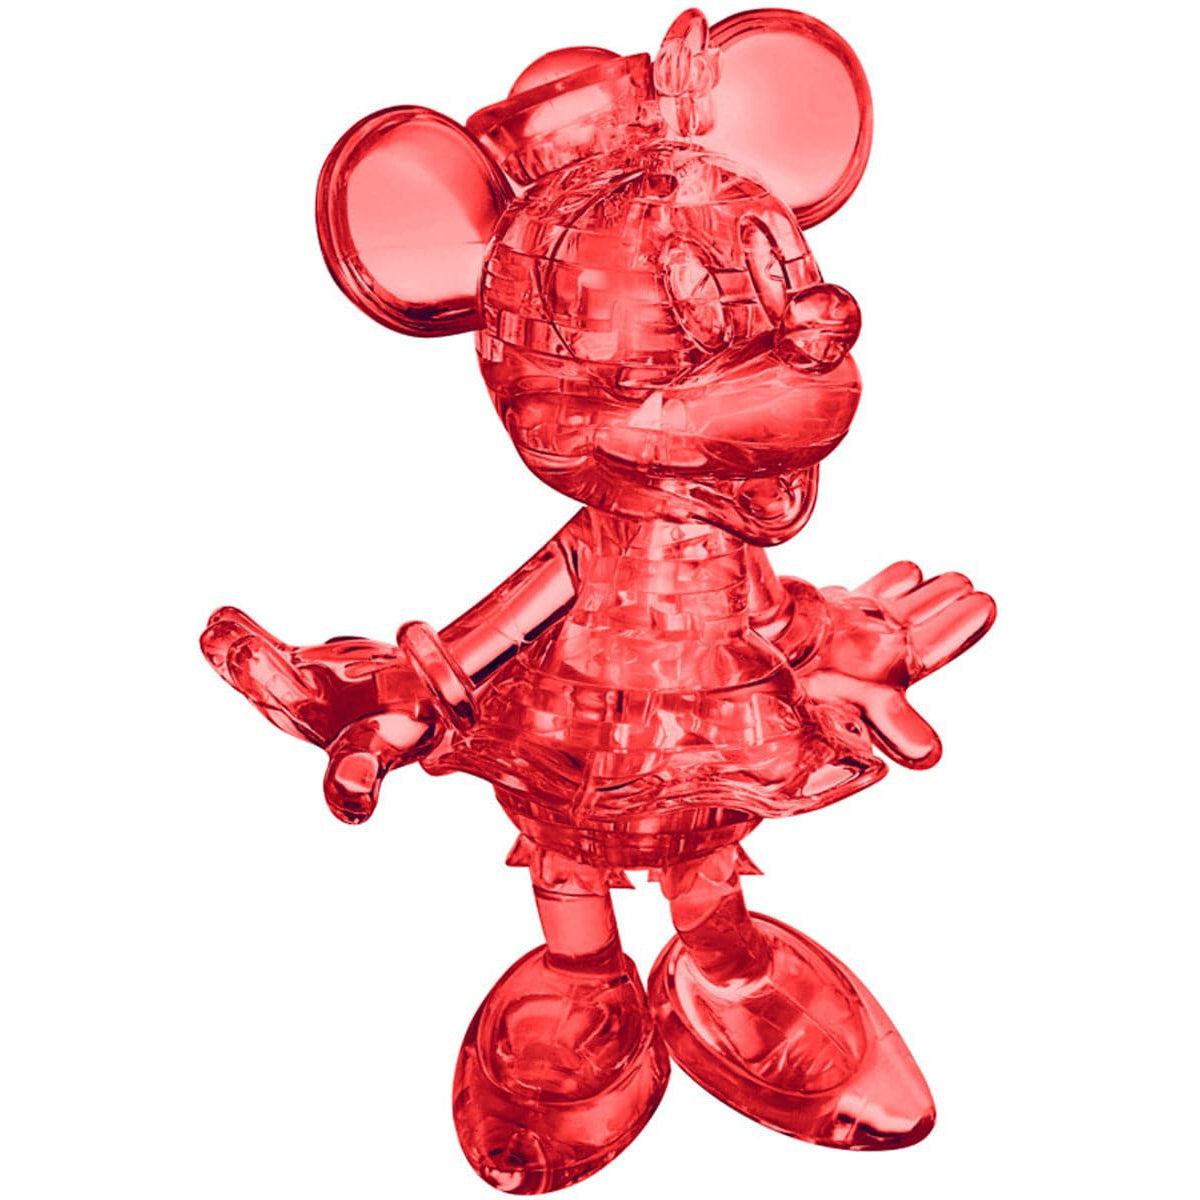 University Games-3D Disney Crystal Puzzle - Red Minnie Mouse-31020-Legacy Toys